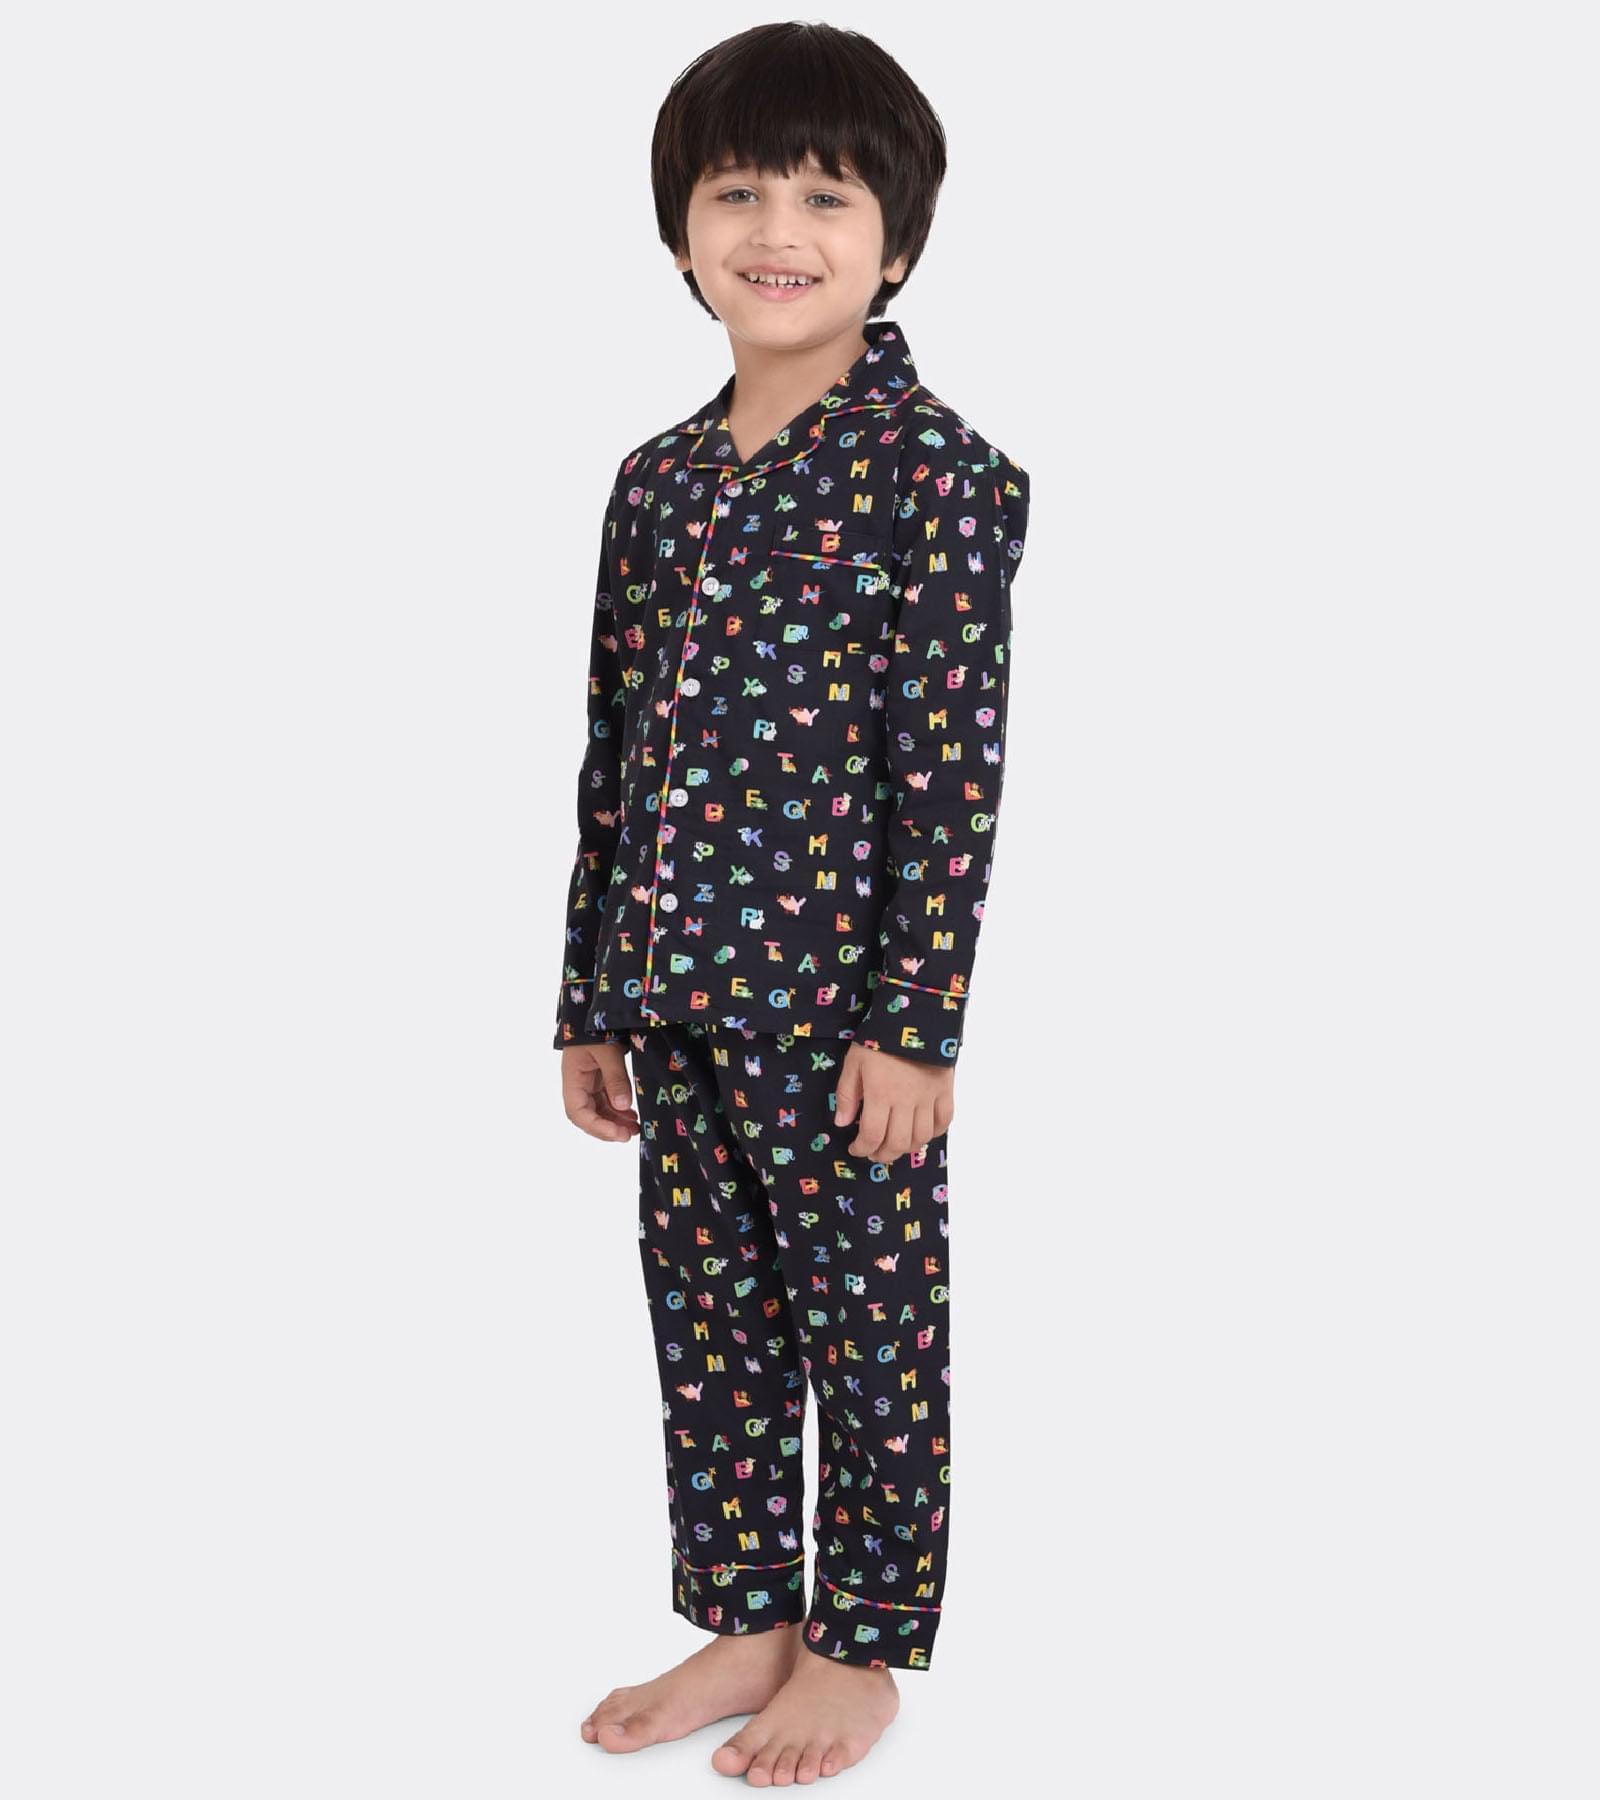 Ninos Dreams Boys Cotton Coord Set Night Suit with Lower (6-8 Years, Black)  : Amazon.in: Fashion